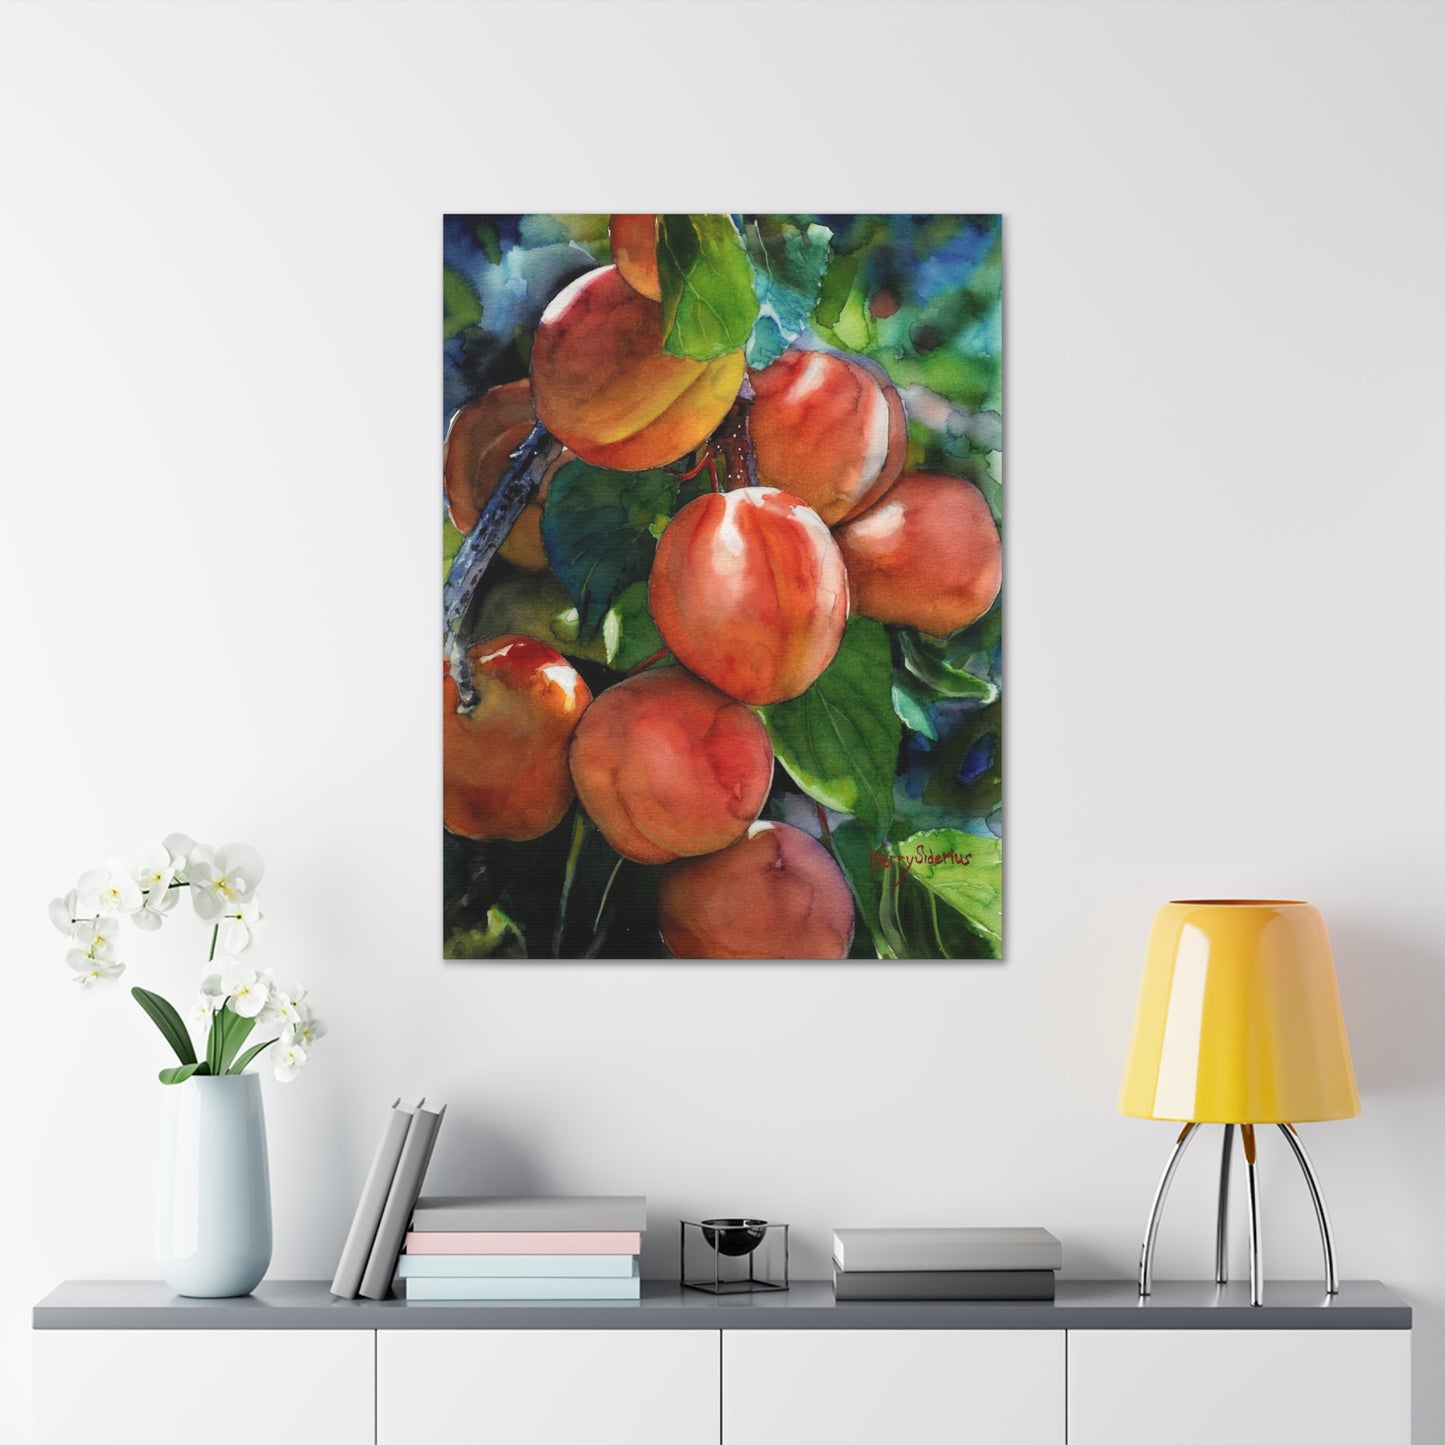 "Peaches Ripe and Ready to be Picked" Gallery Wrapped Canvas